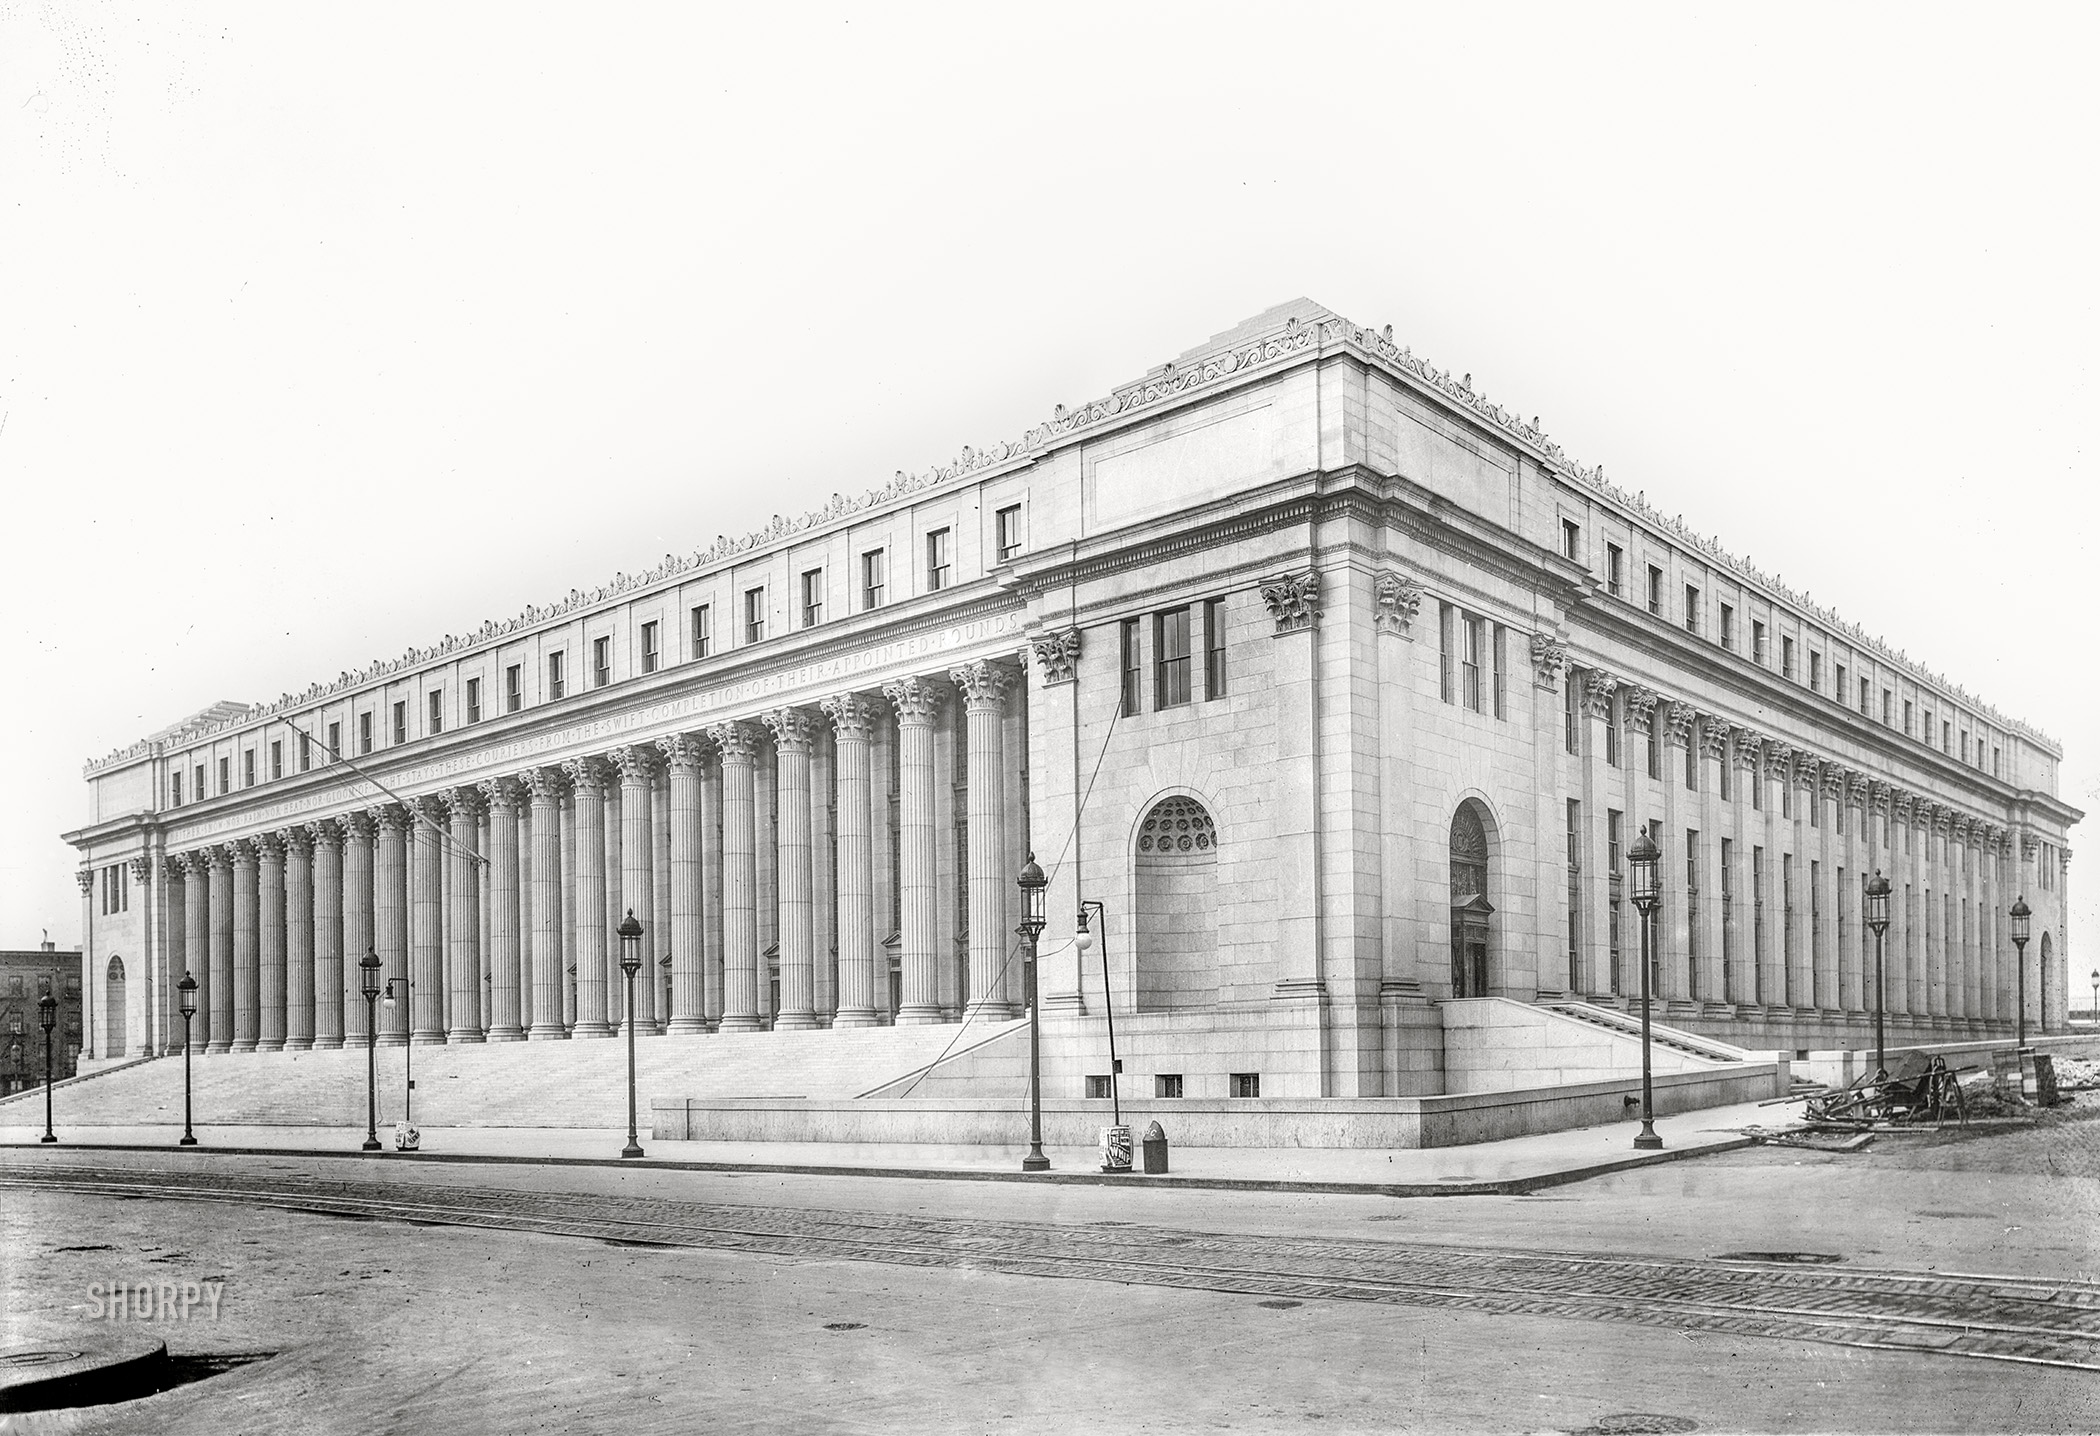 New York's new post office on Eighth Avenue circa 1912. Enlarged in 1934, it's now called the James Farley Building. View full size. In this seemingly deserted time exposure we can see the ghostly images of three different sets of legs.